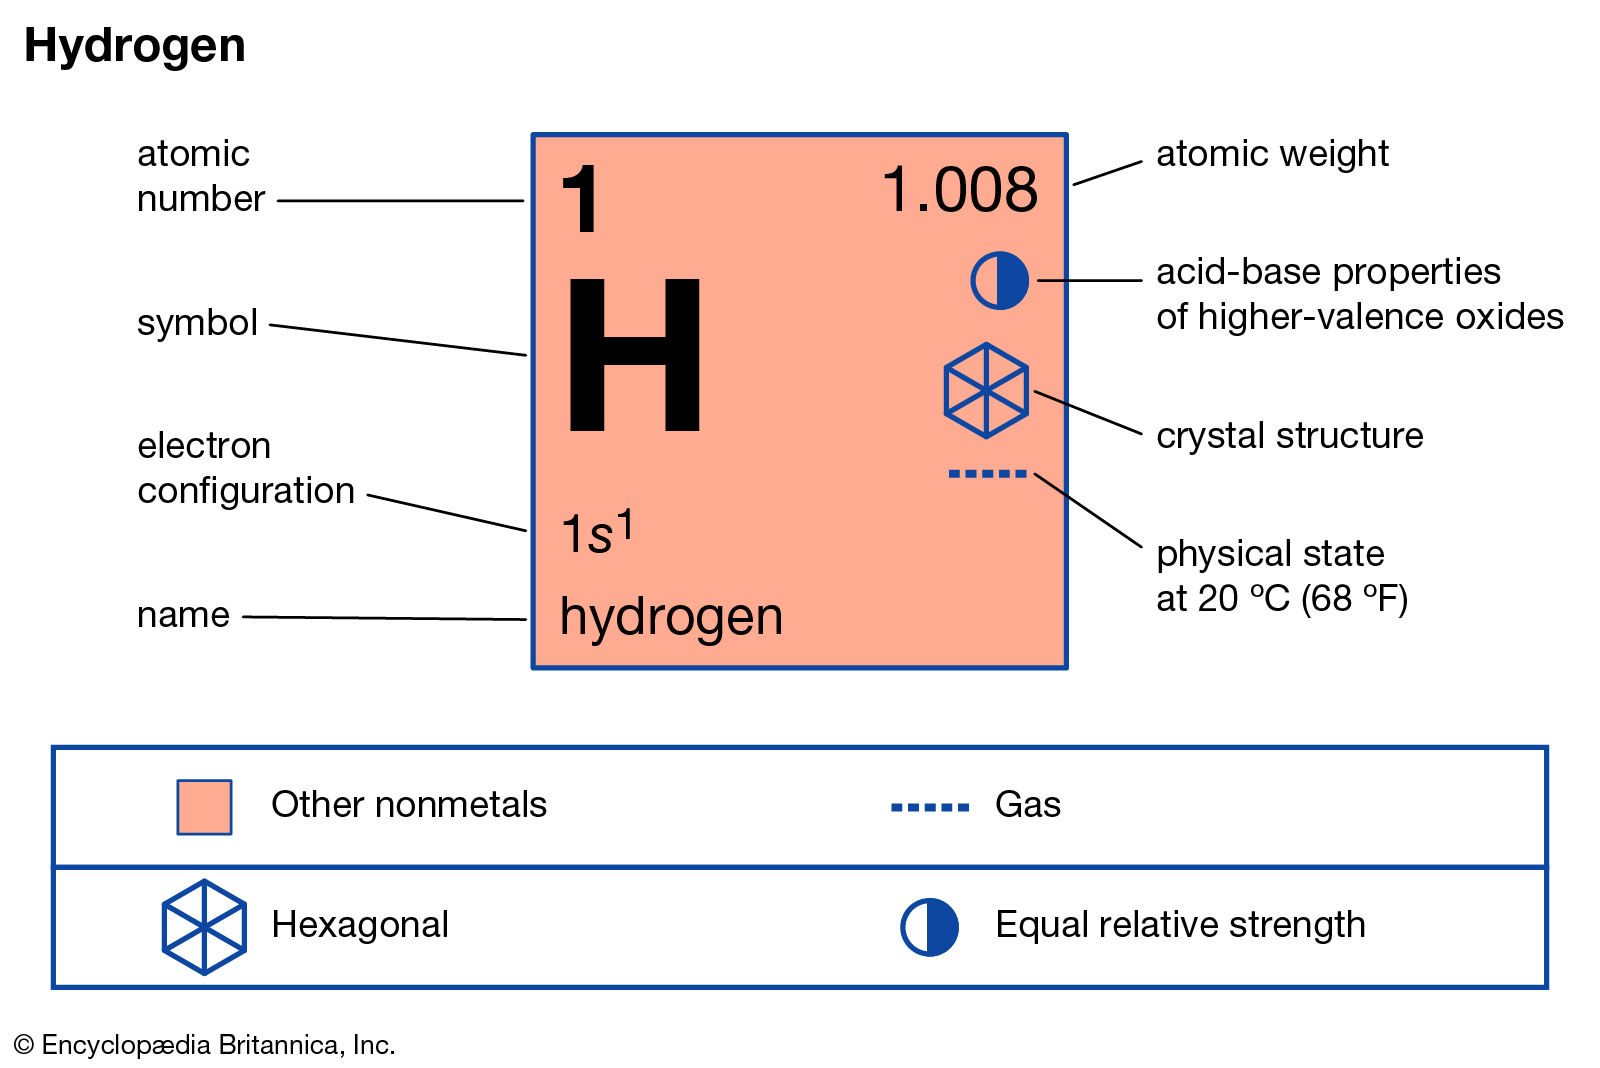 hinh-anh-interesting-facts-about-hydrogen-the-lightest-element-in-the-periodic-table-32-0